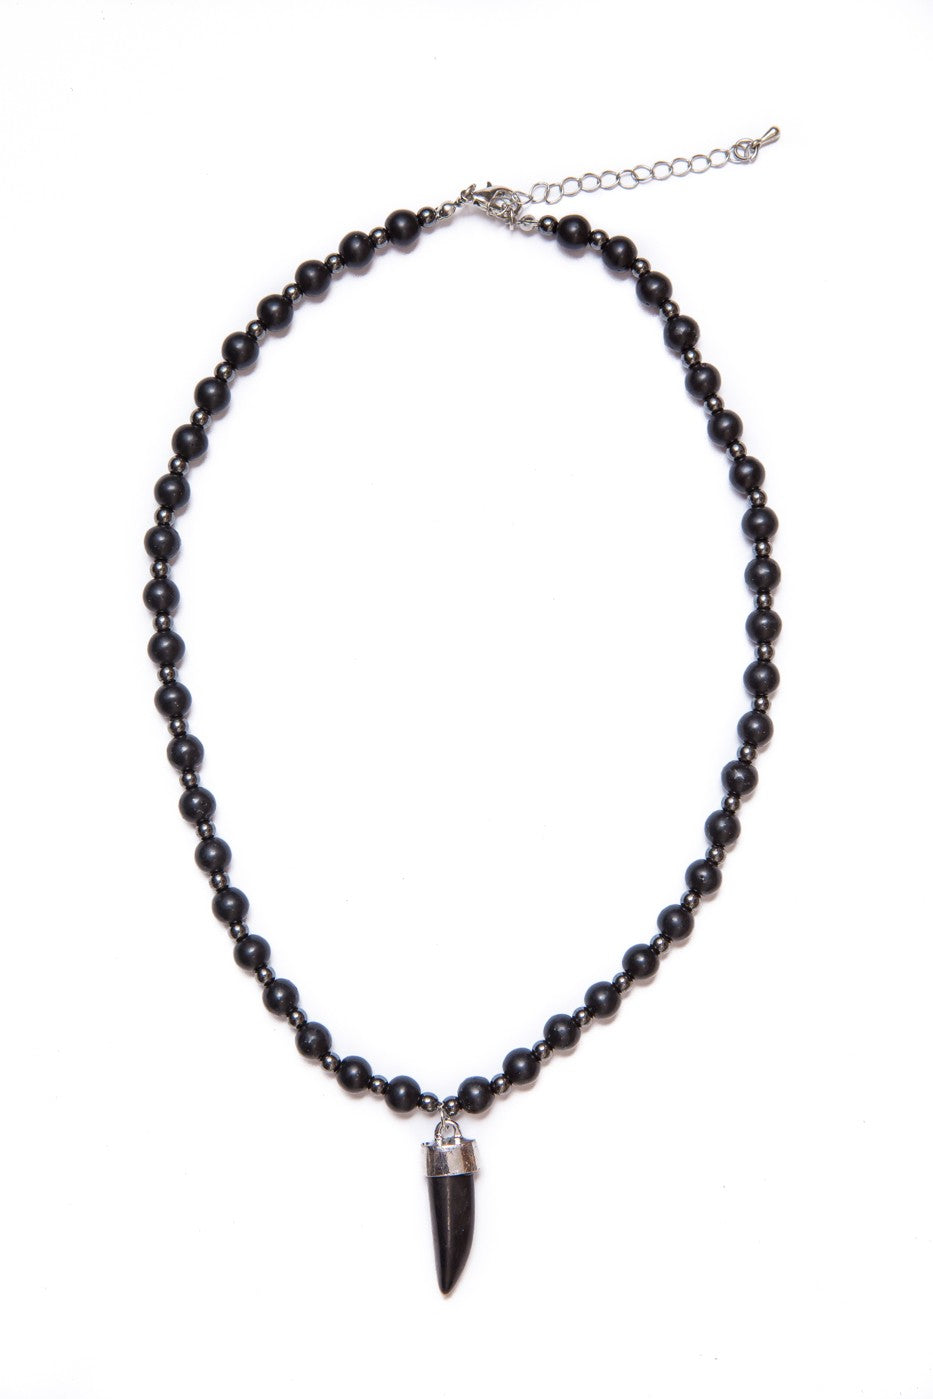 Black Beads Chain for Men and women : Amazon.in: Fashion